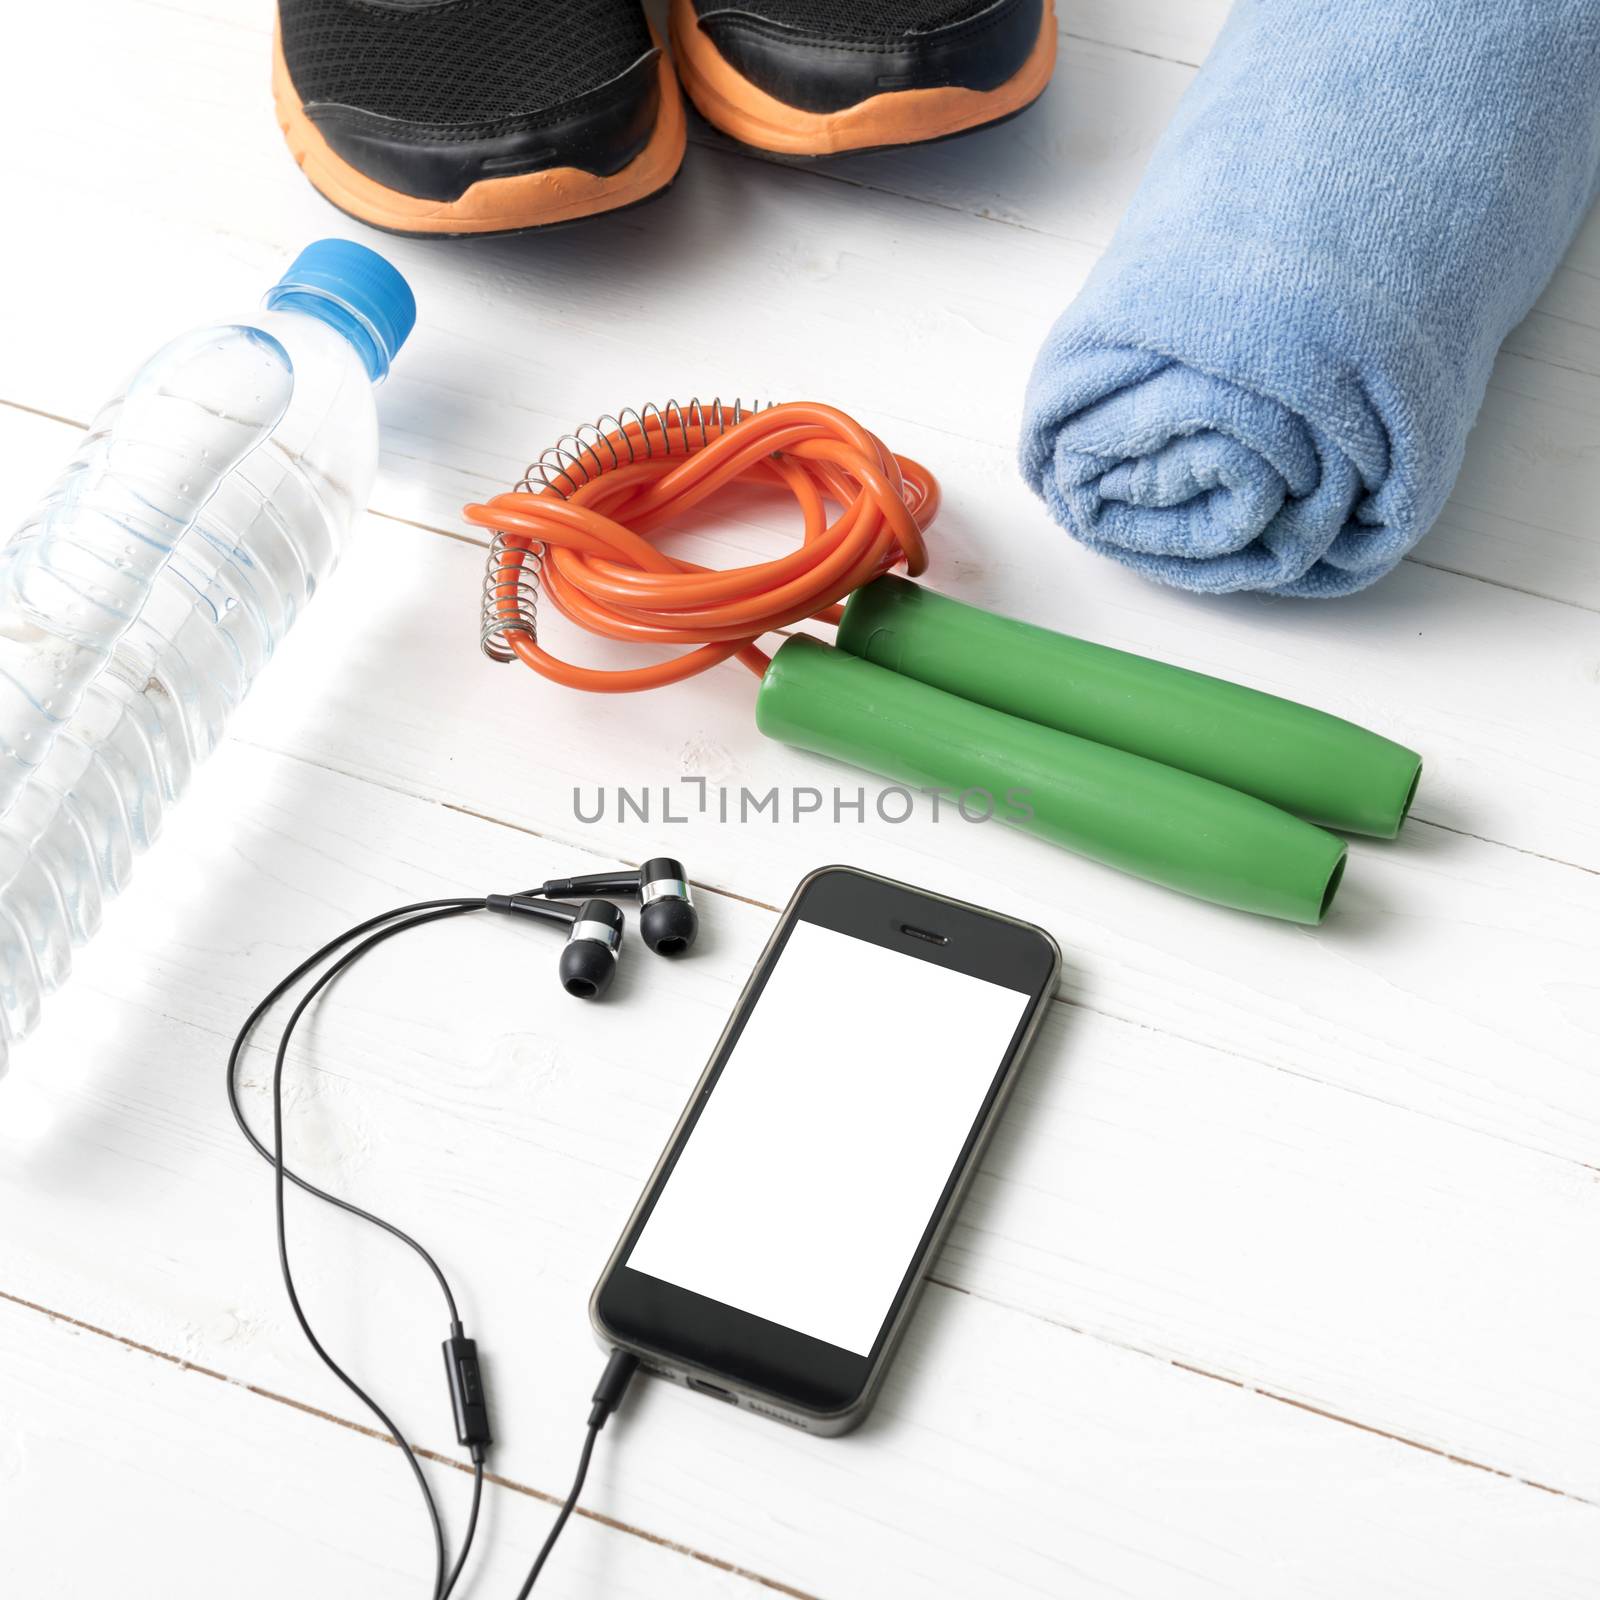 fitness equipment : running shoes,towel,jumping rope,water bottle and phone on white wood table